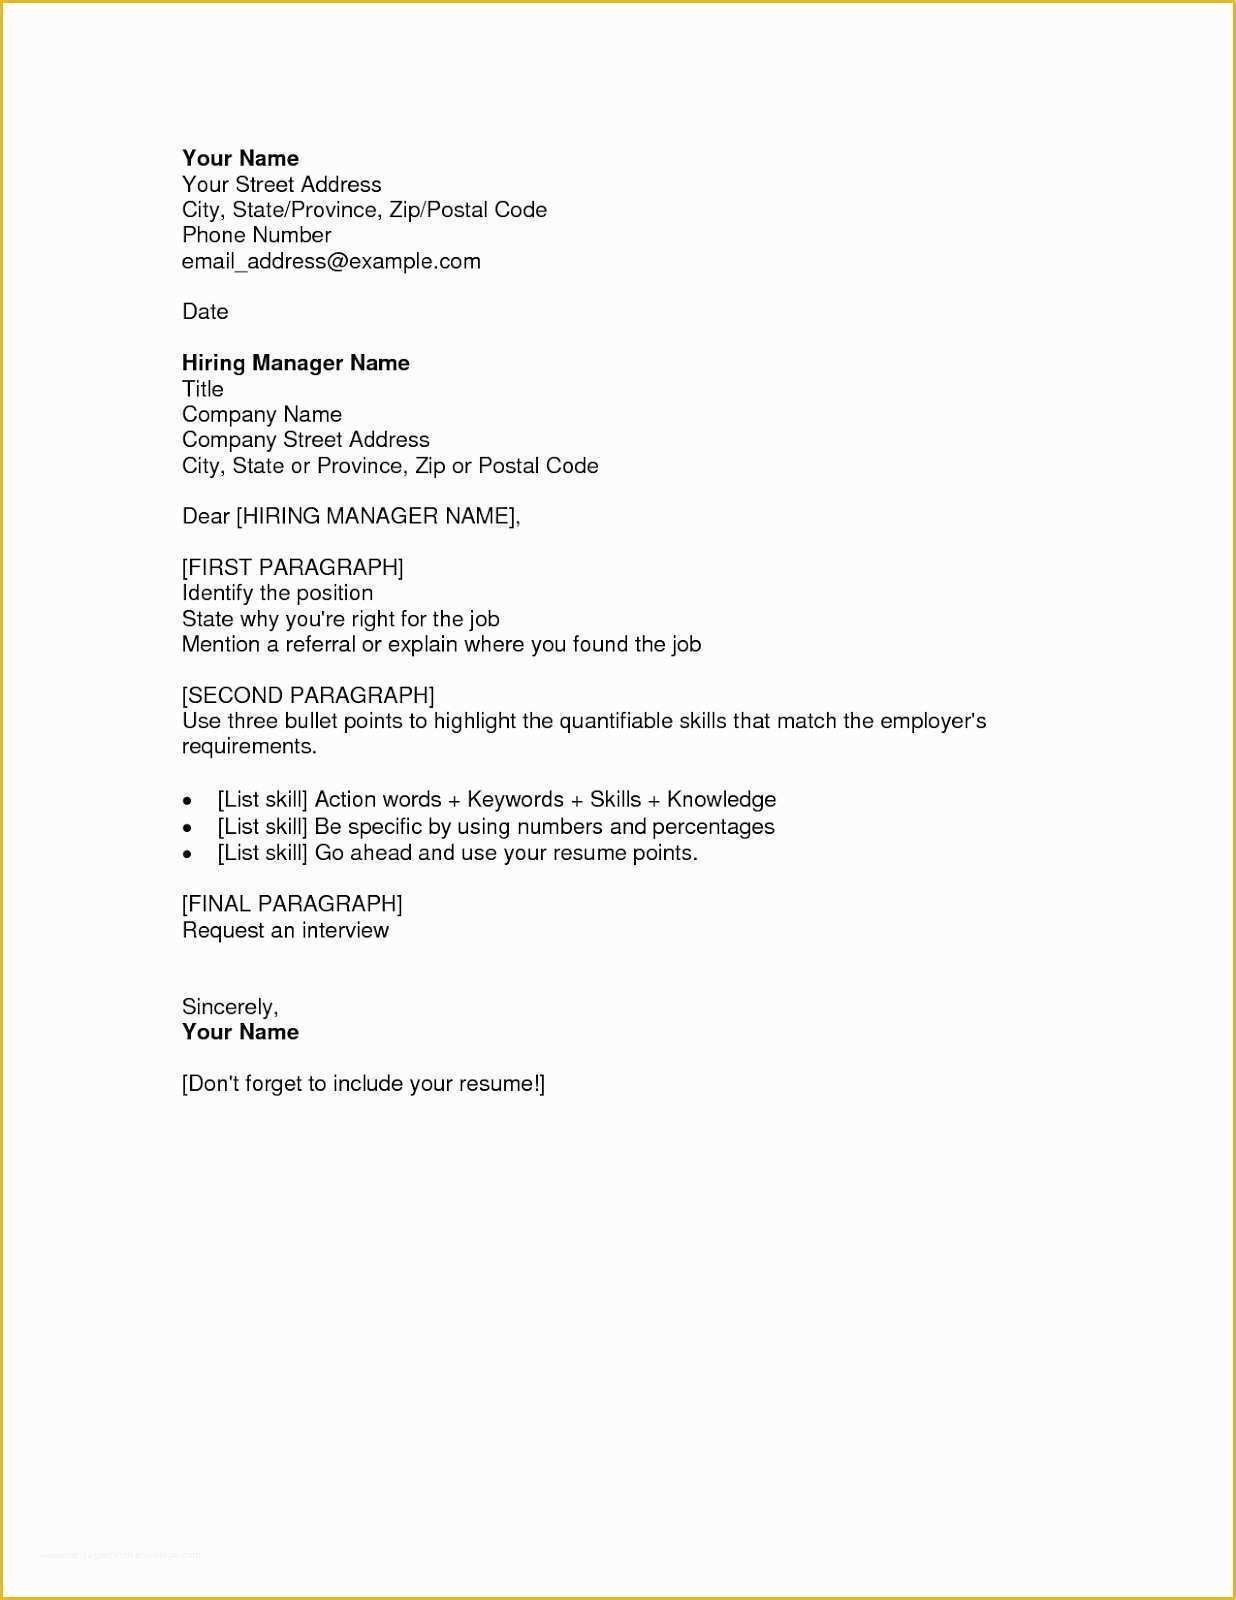 Free Online Resume Cover Letter Template Of Free Cover Letter Samples for Resumes